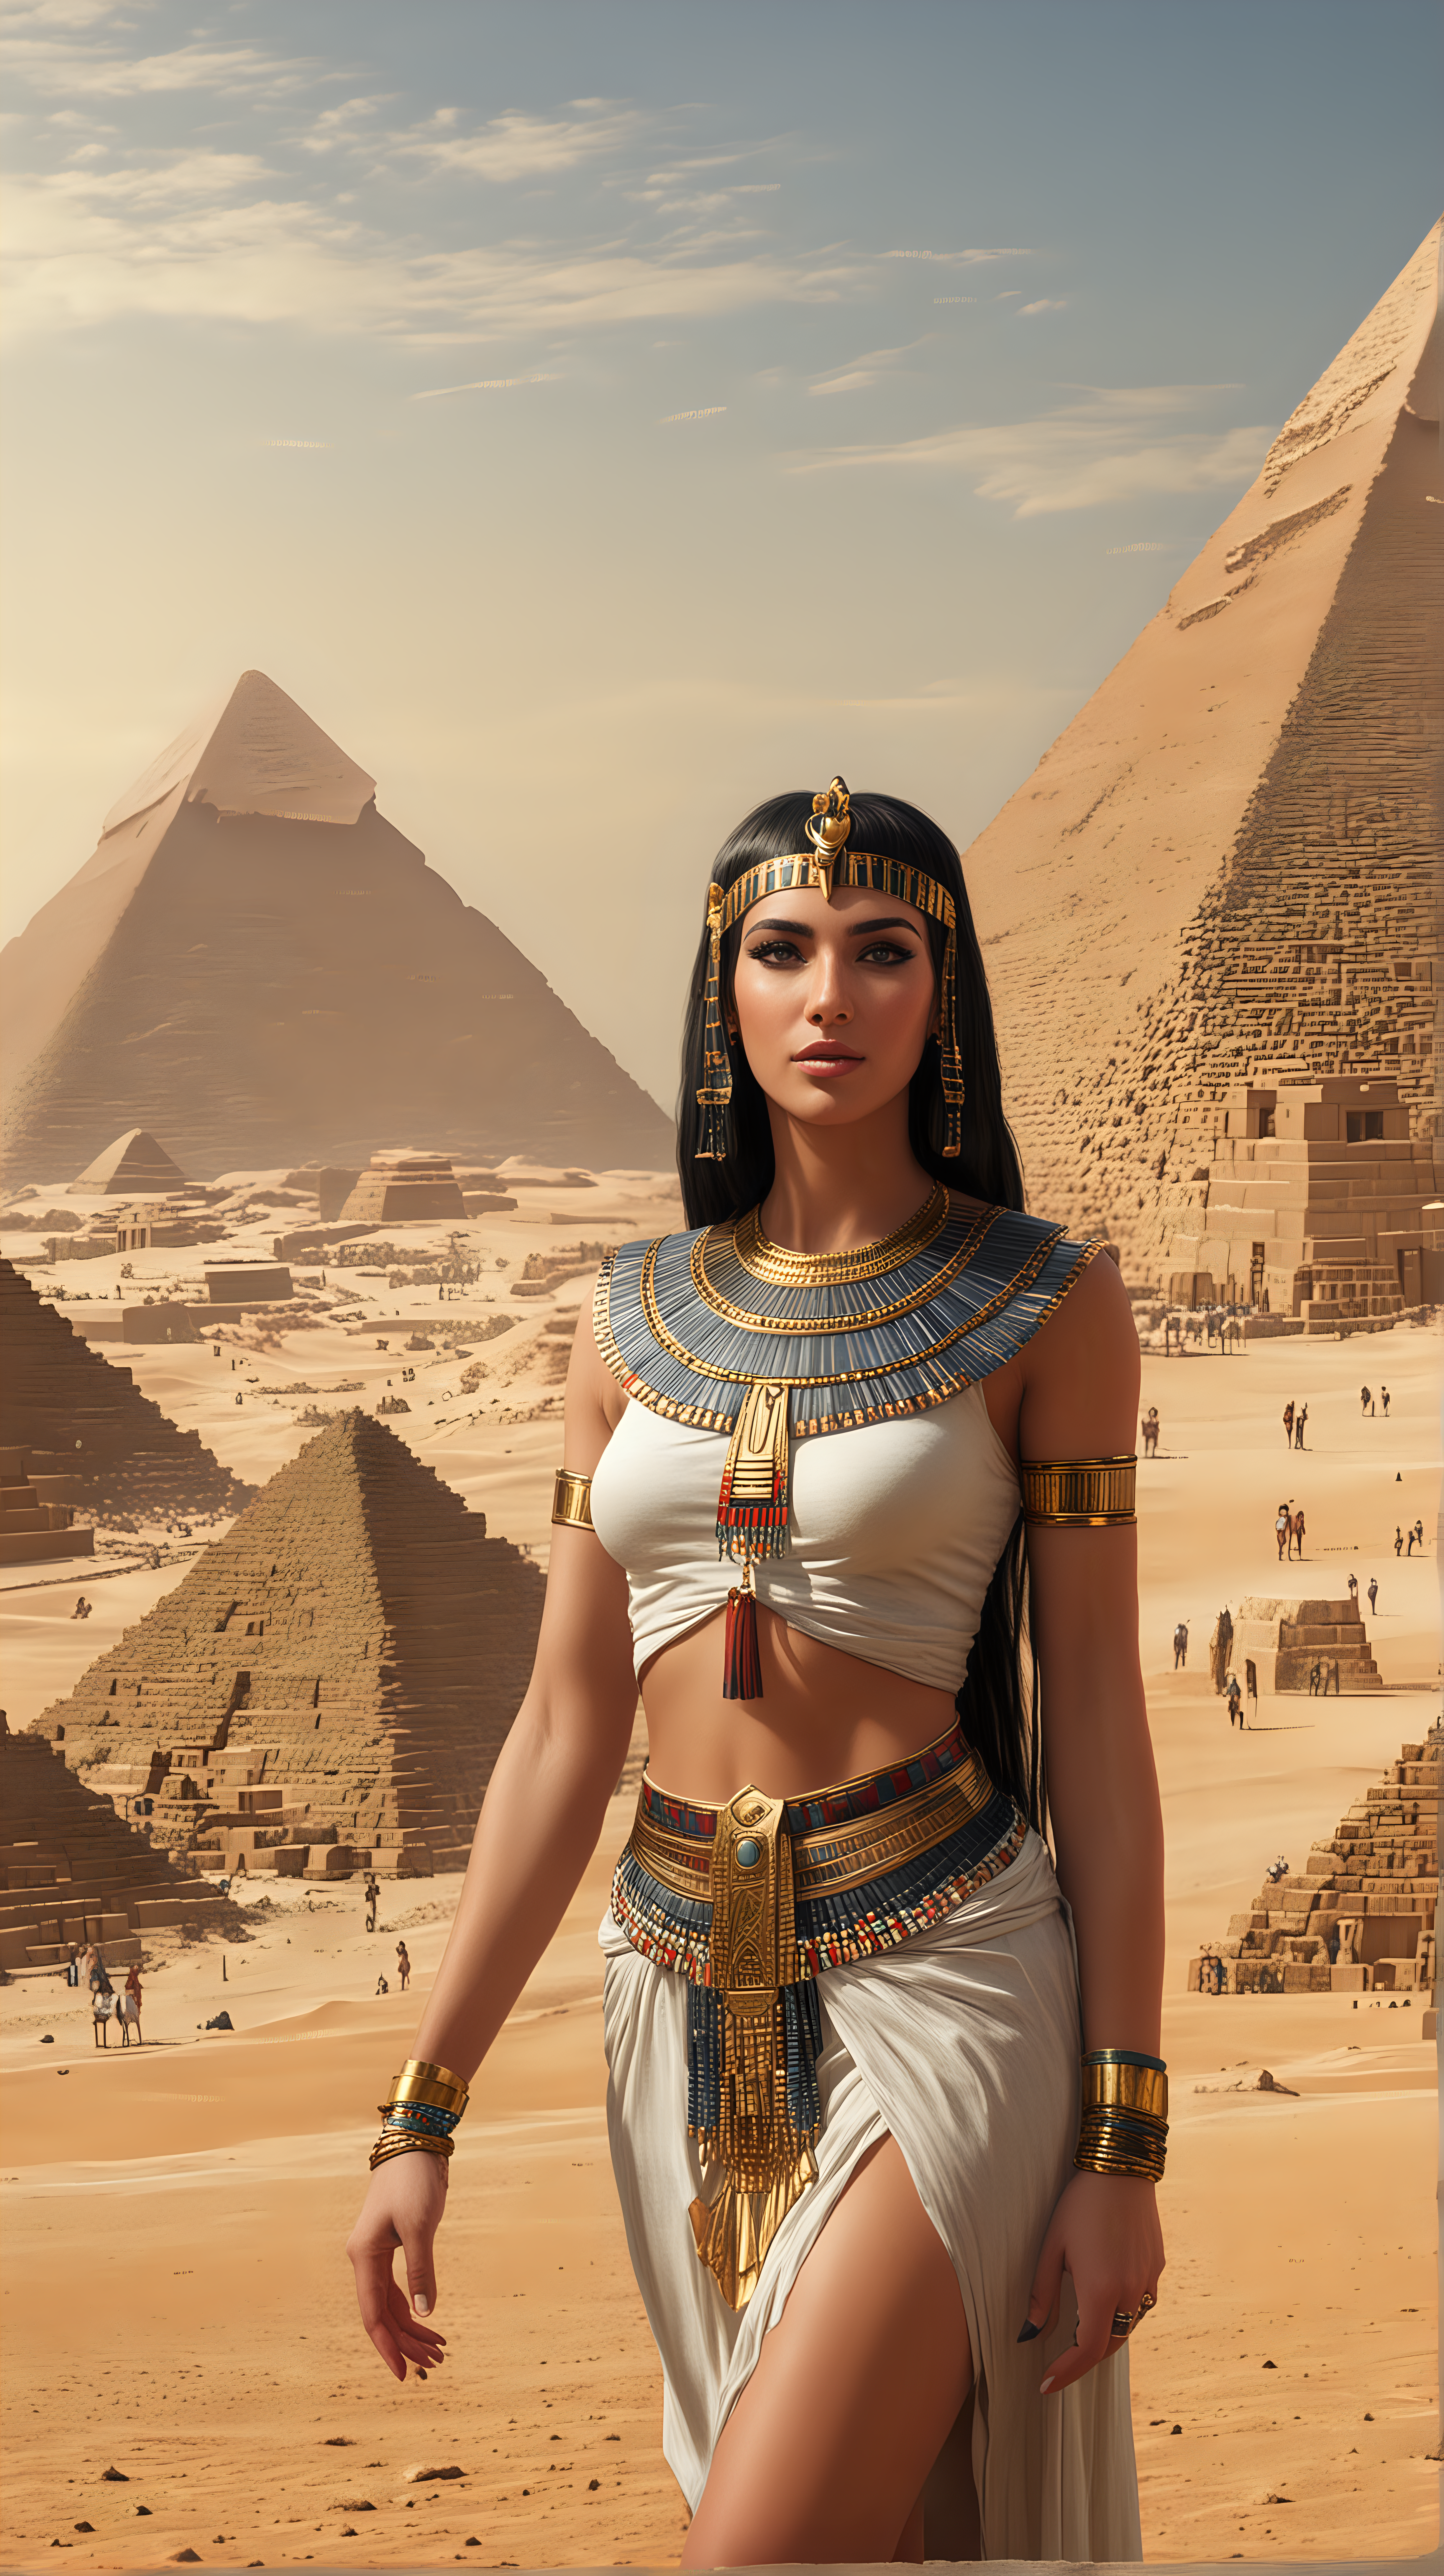 Hyper Realistic Portrait of Cleopatra with Egyptian Pyramids in the Background